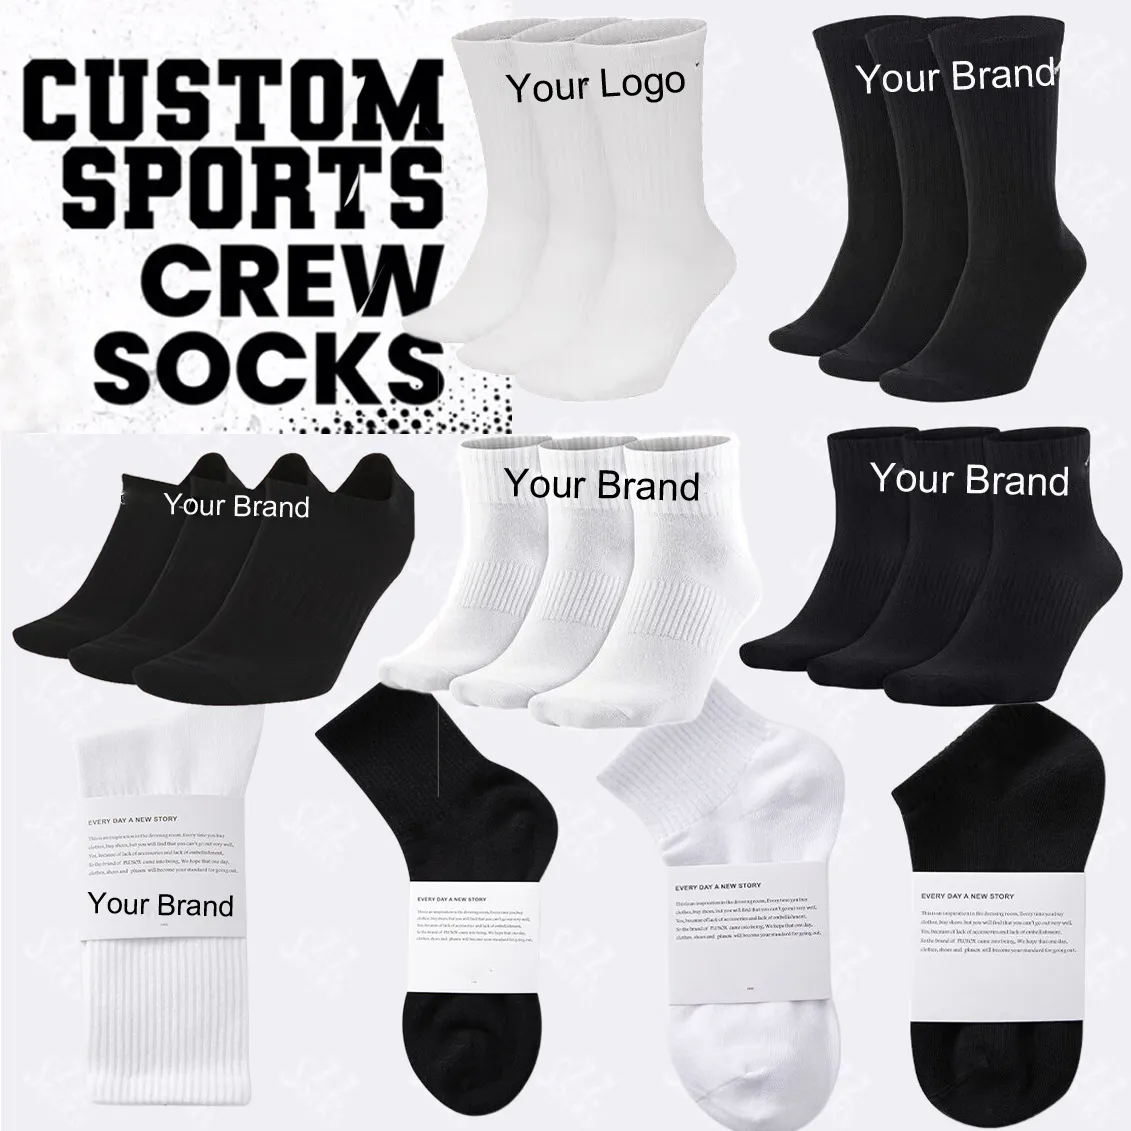 Top Quality Cotton Custom made Your Own design logo Socks Men Athletic Sneakers Skate Styles For West Slippers Air Adidaseliedly